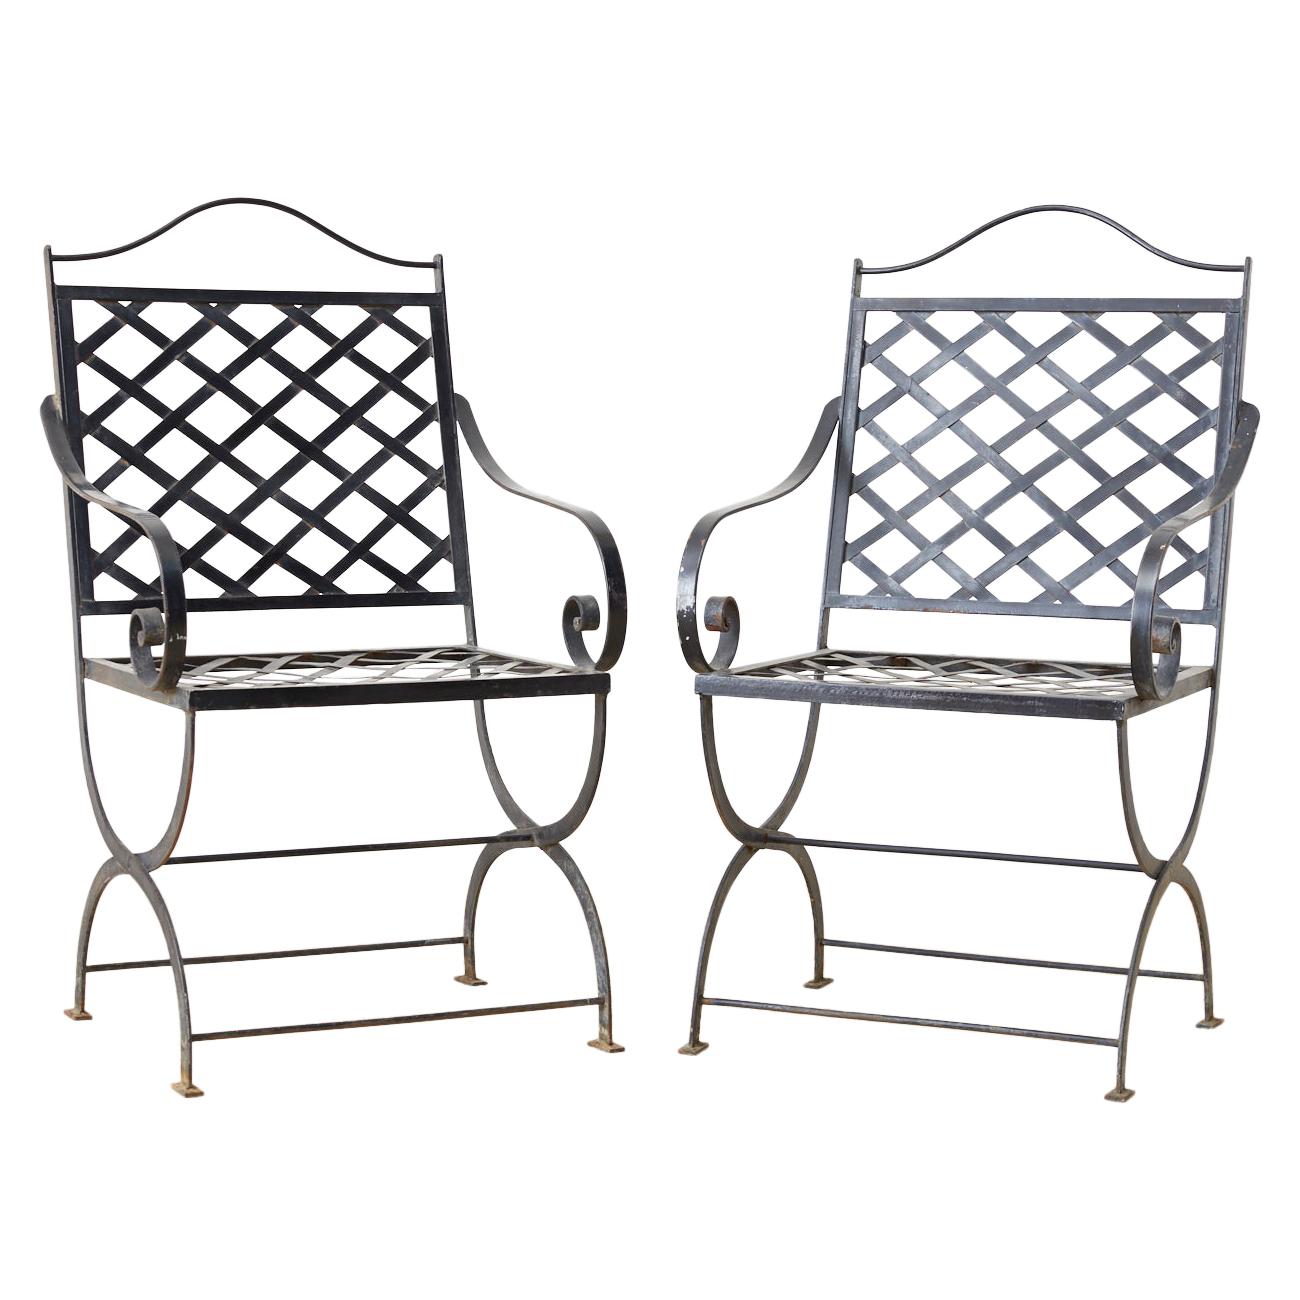 Pair of Neoclassical Style Curule Leg Iron Garden Chairs